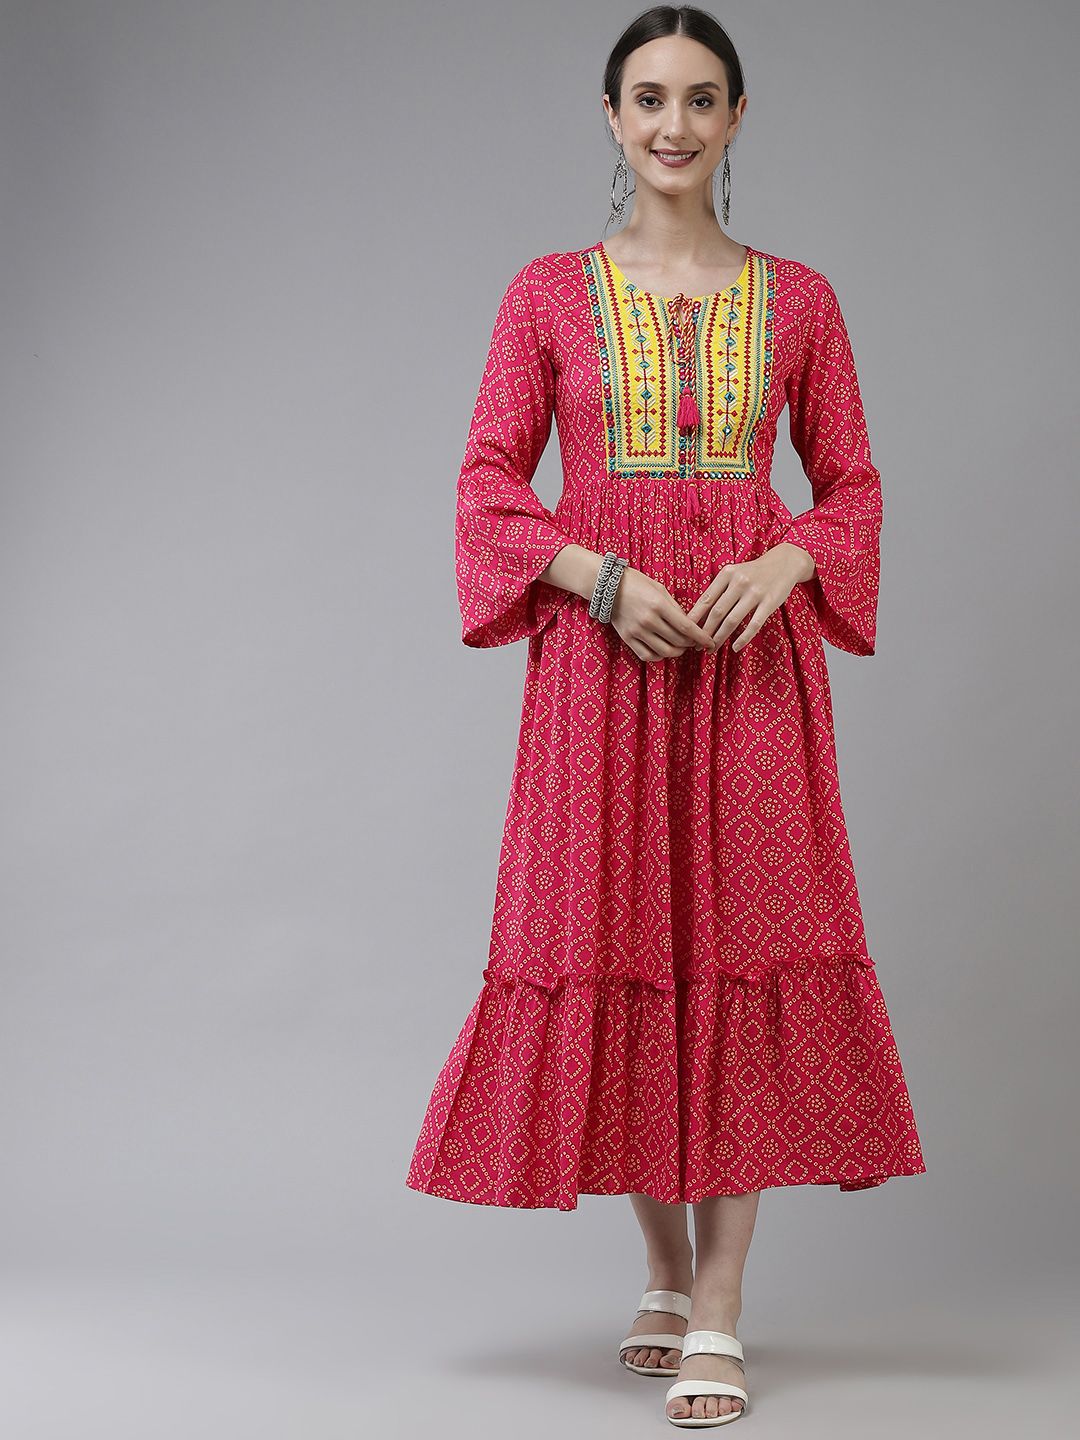 Yufta Pink & Yellow Ethnic Motifs Embroidered Tie-Up Neck Ethnic A-Line Midi Dress Price in India